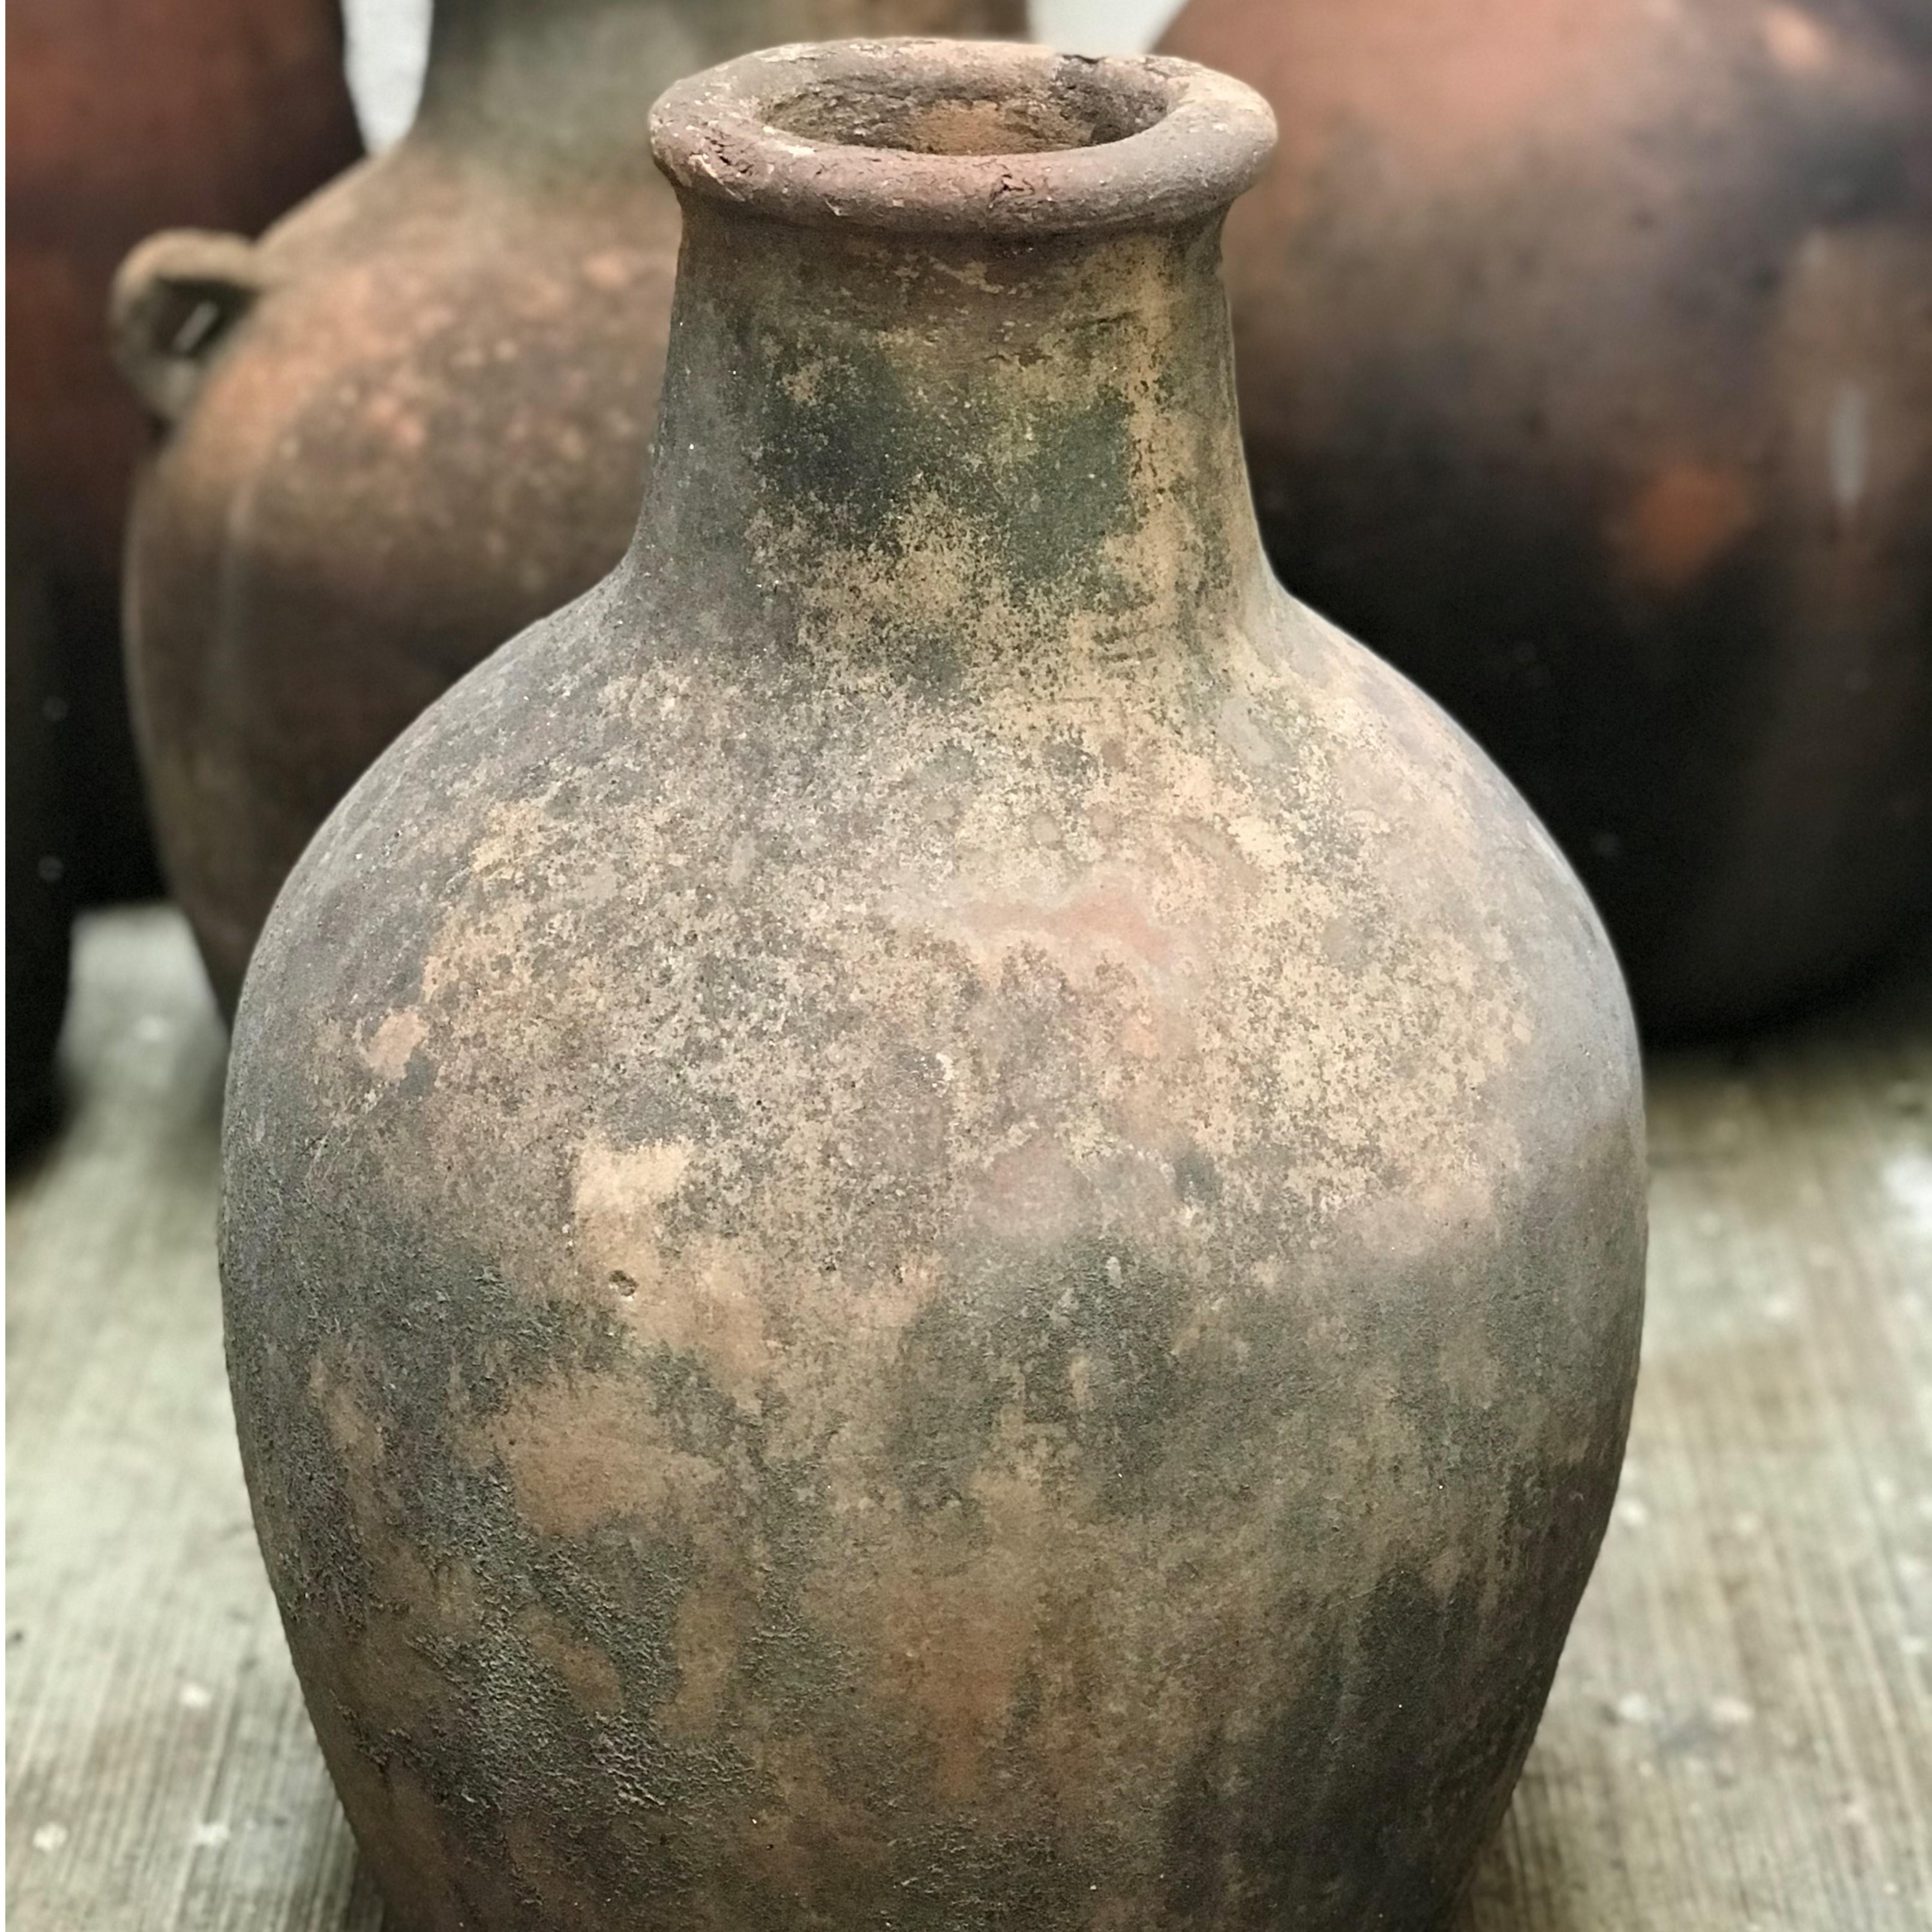 Victoriano is a vintage terracotta vessel rescued from an hacienda in the region of Jalisco, Mexico. The dark tones and aging of this piece makes for a great a garden piece or decorative interior accessory. 

Victoriano
Jalisco, Mexico
circa